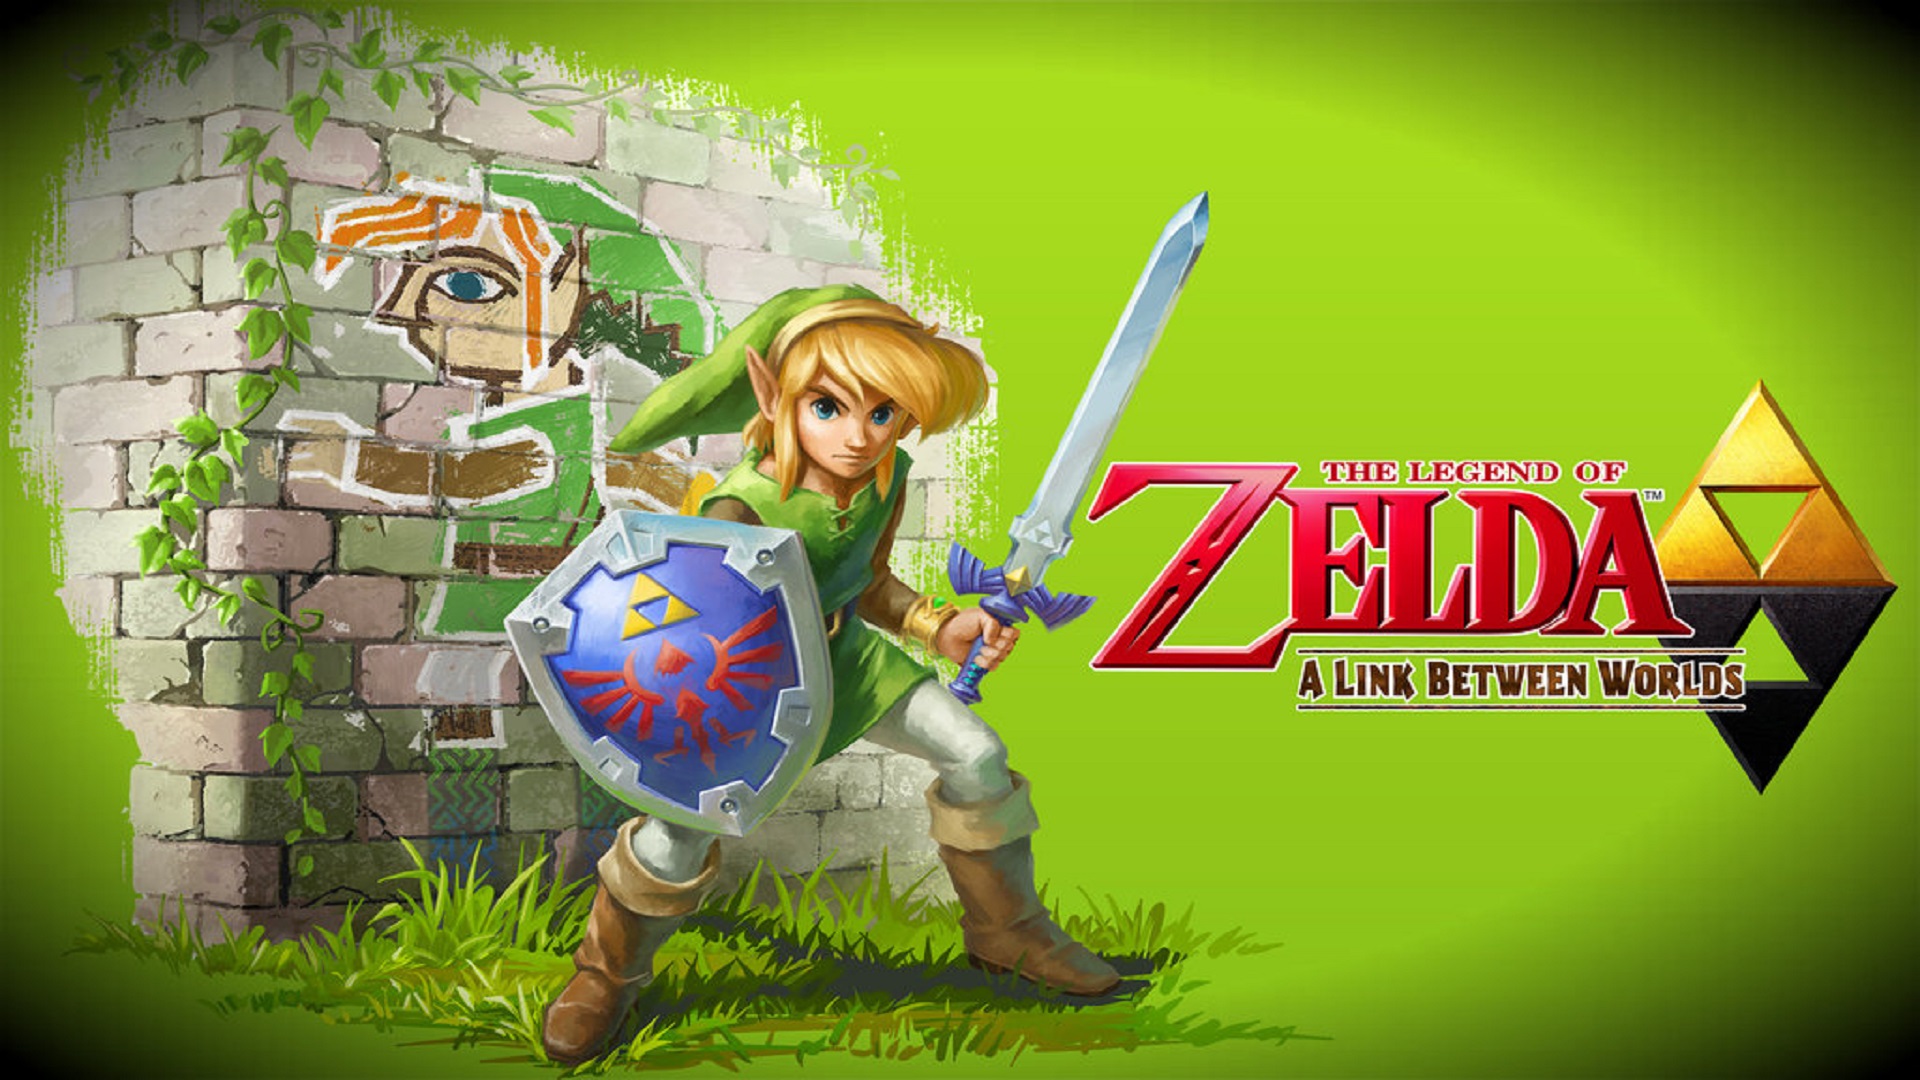 the-legend-of-zelda-a-link-between-worlds-review-nostalgic-new-directions-the-koalition